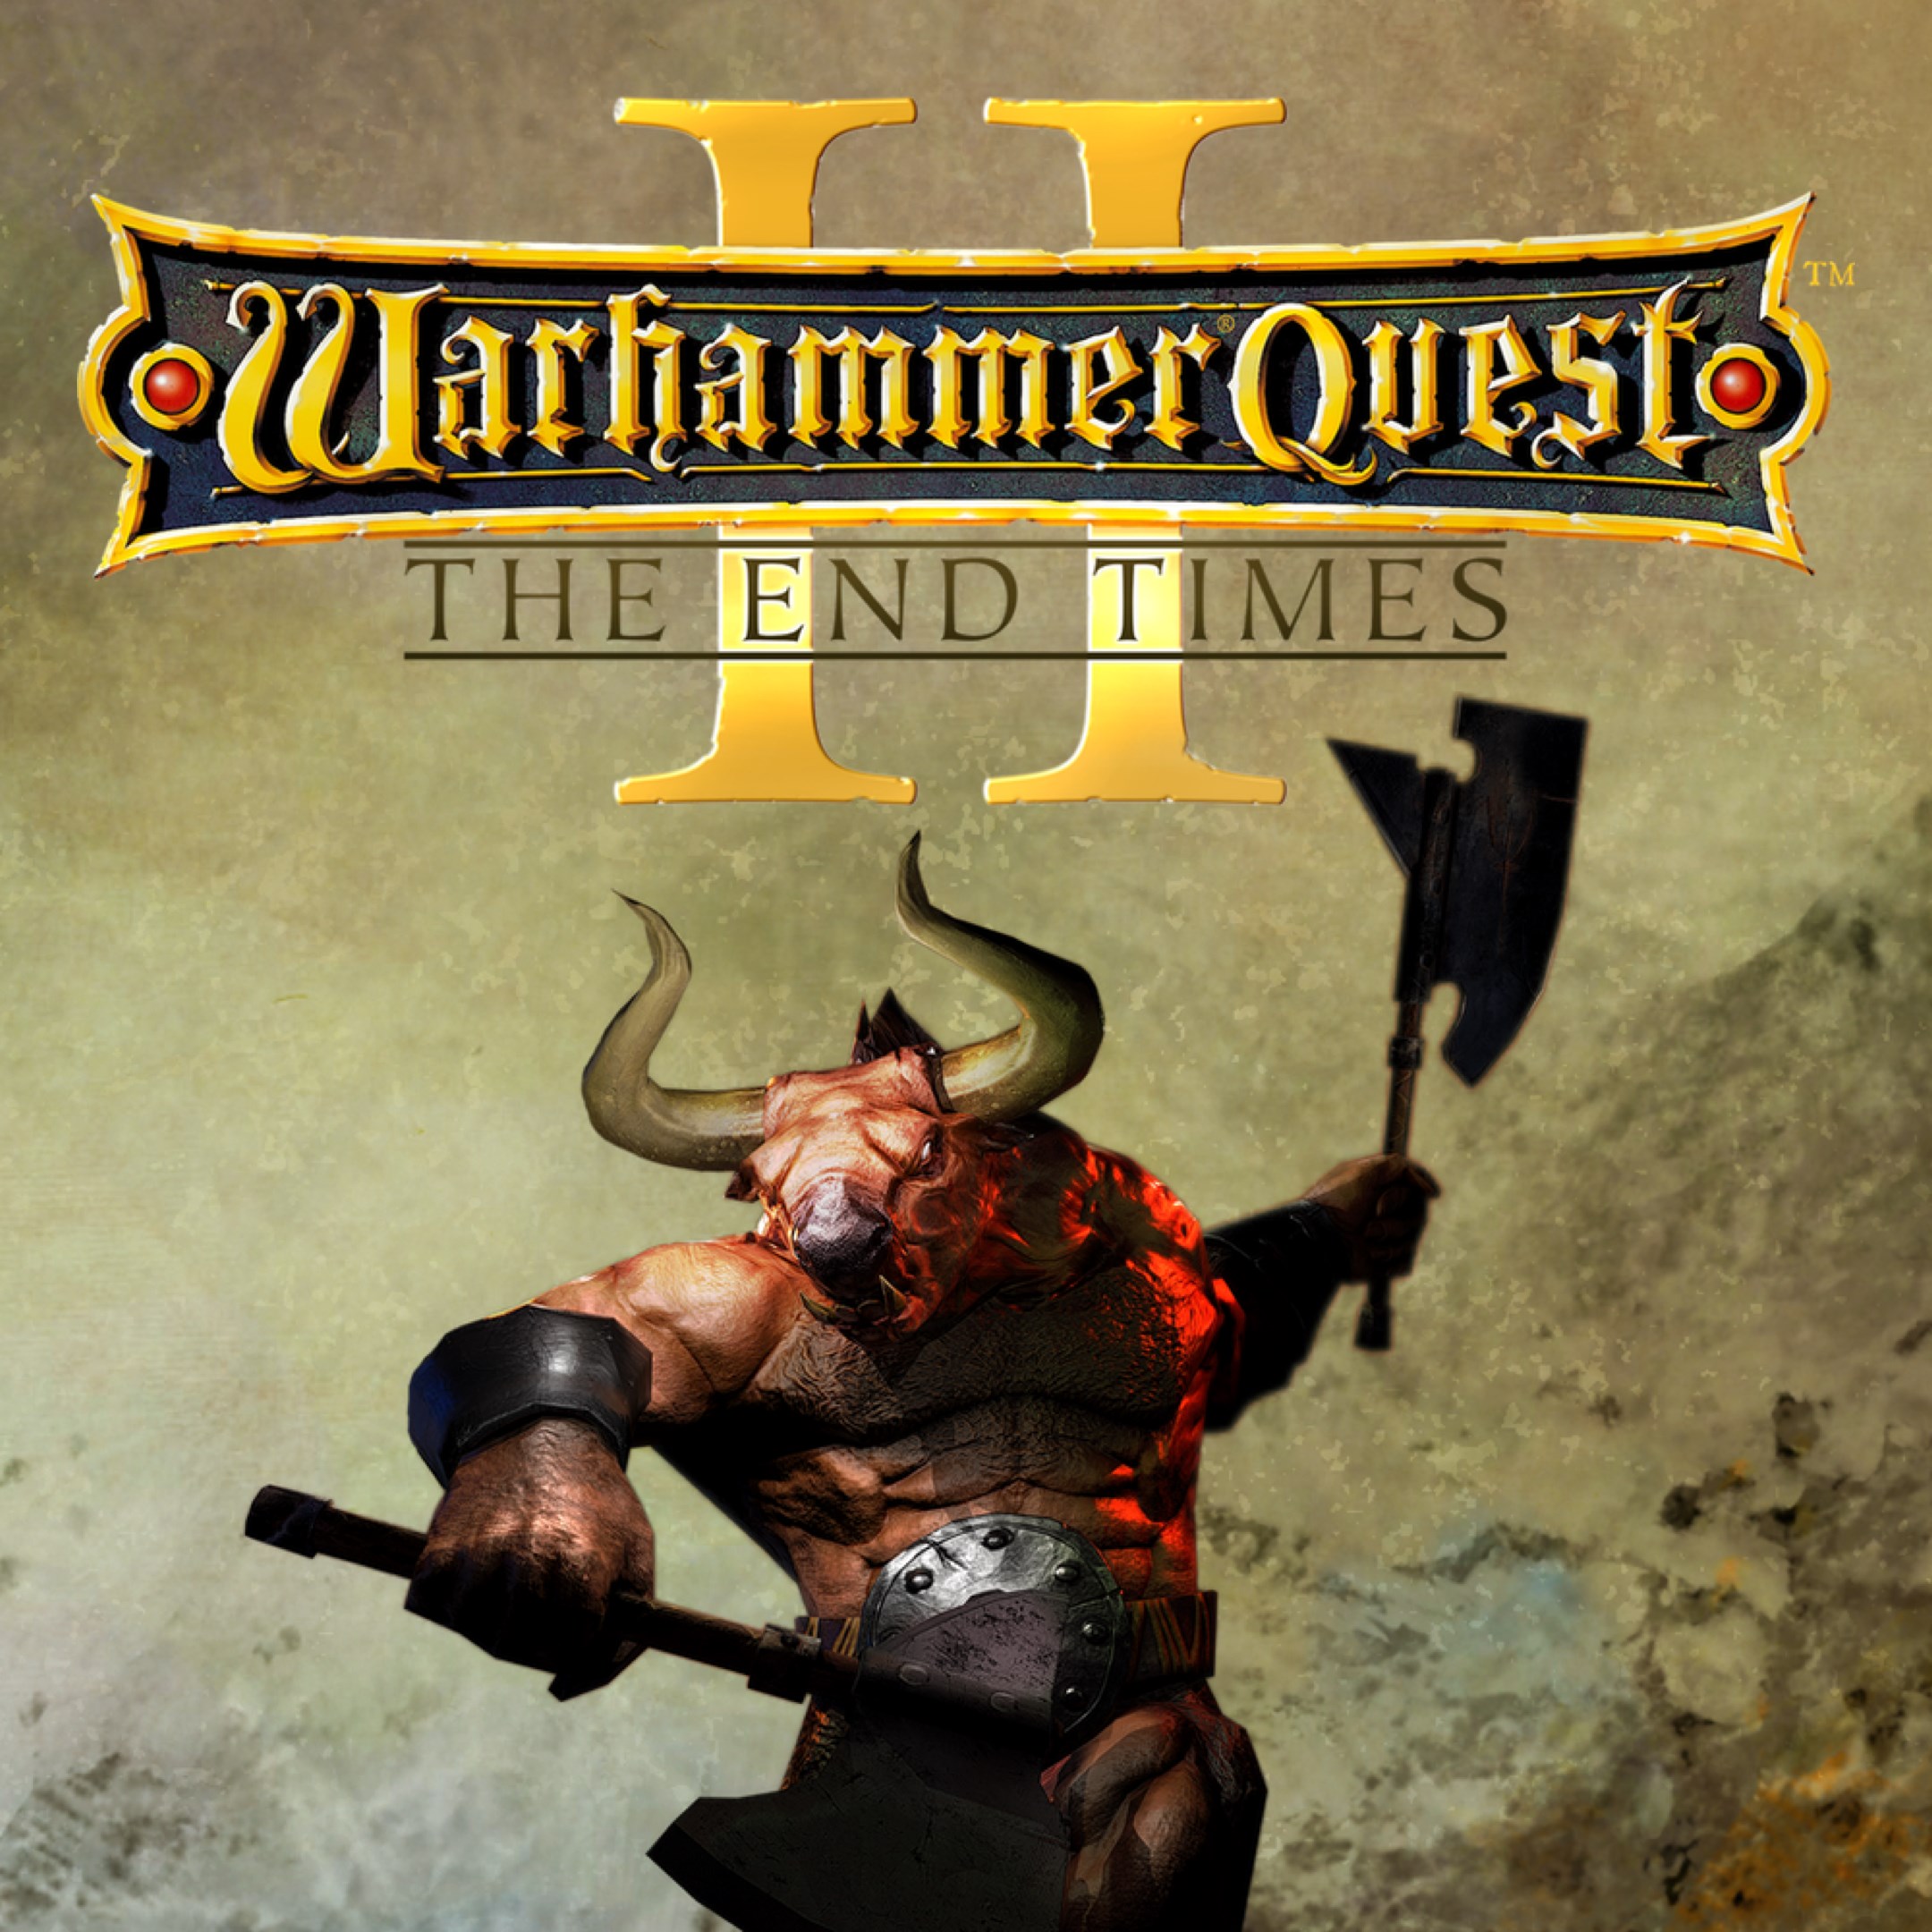 Warhammer quest 2. Warhammer Quest 2: the end times. Warhammer Quest 2 the end times игра. Warhammer the end times classes. Warhammer: end times - Vermintide обложка.